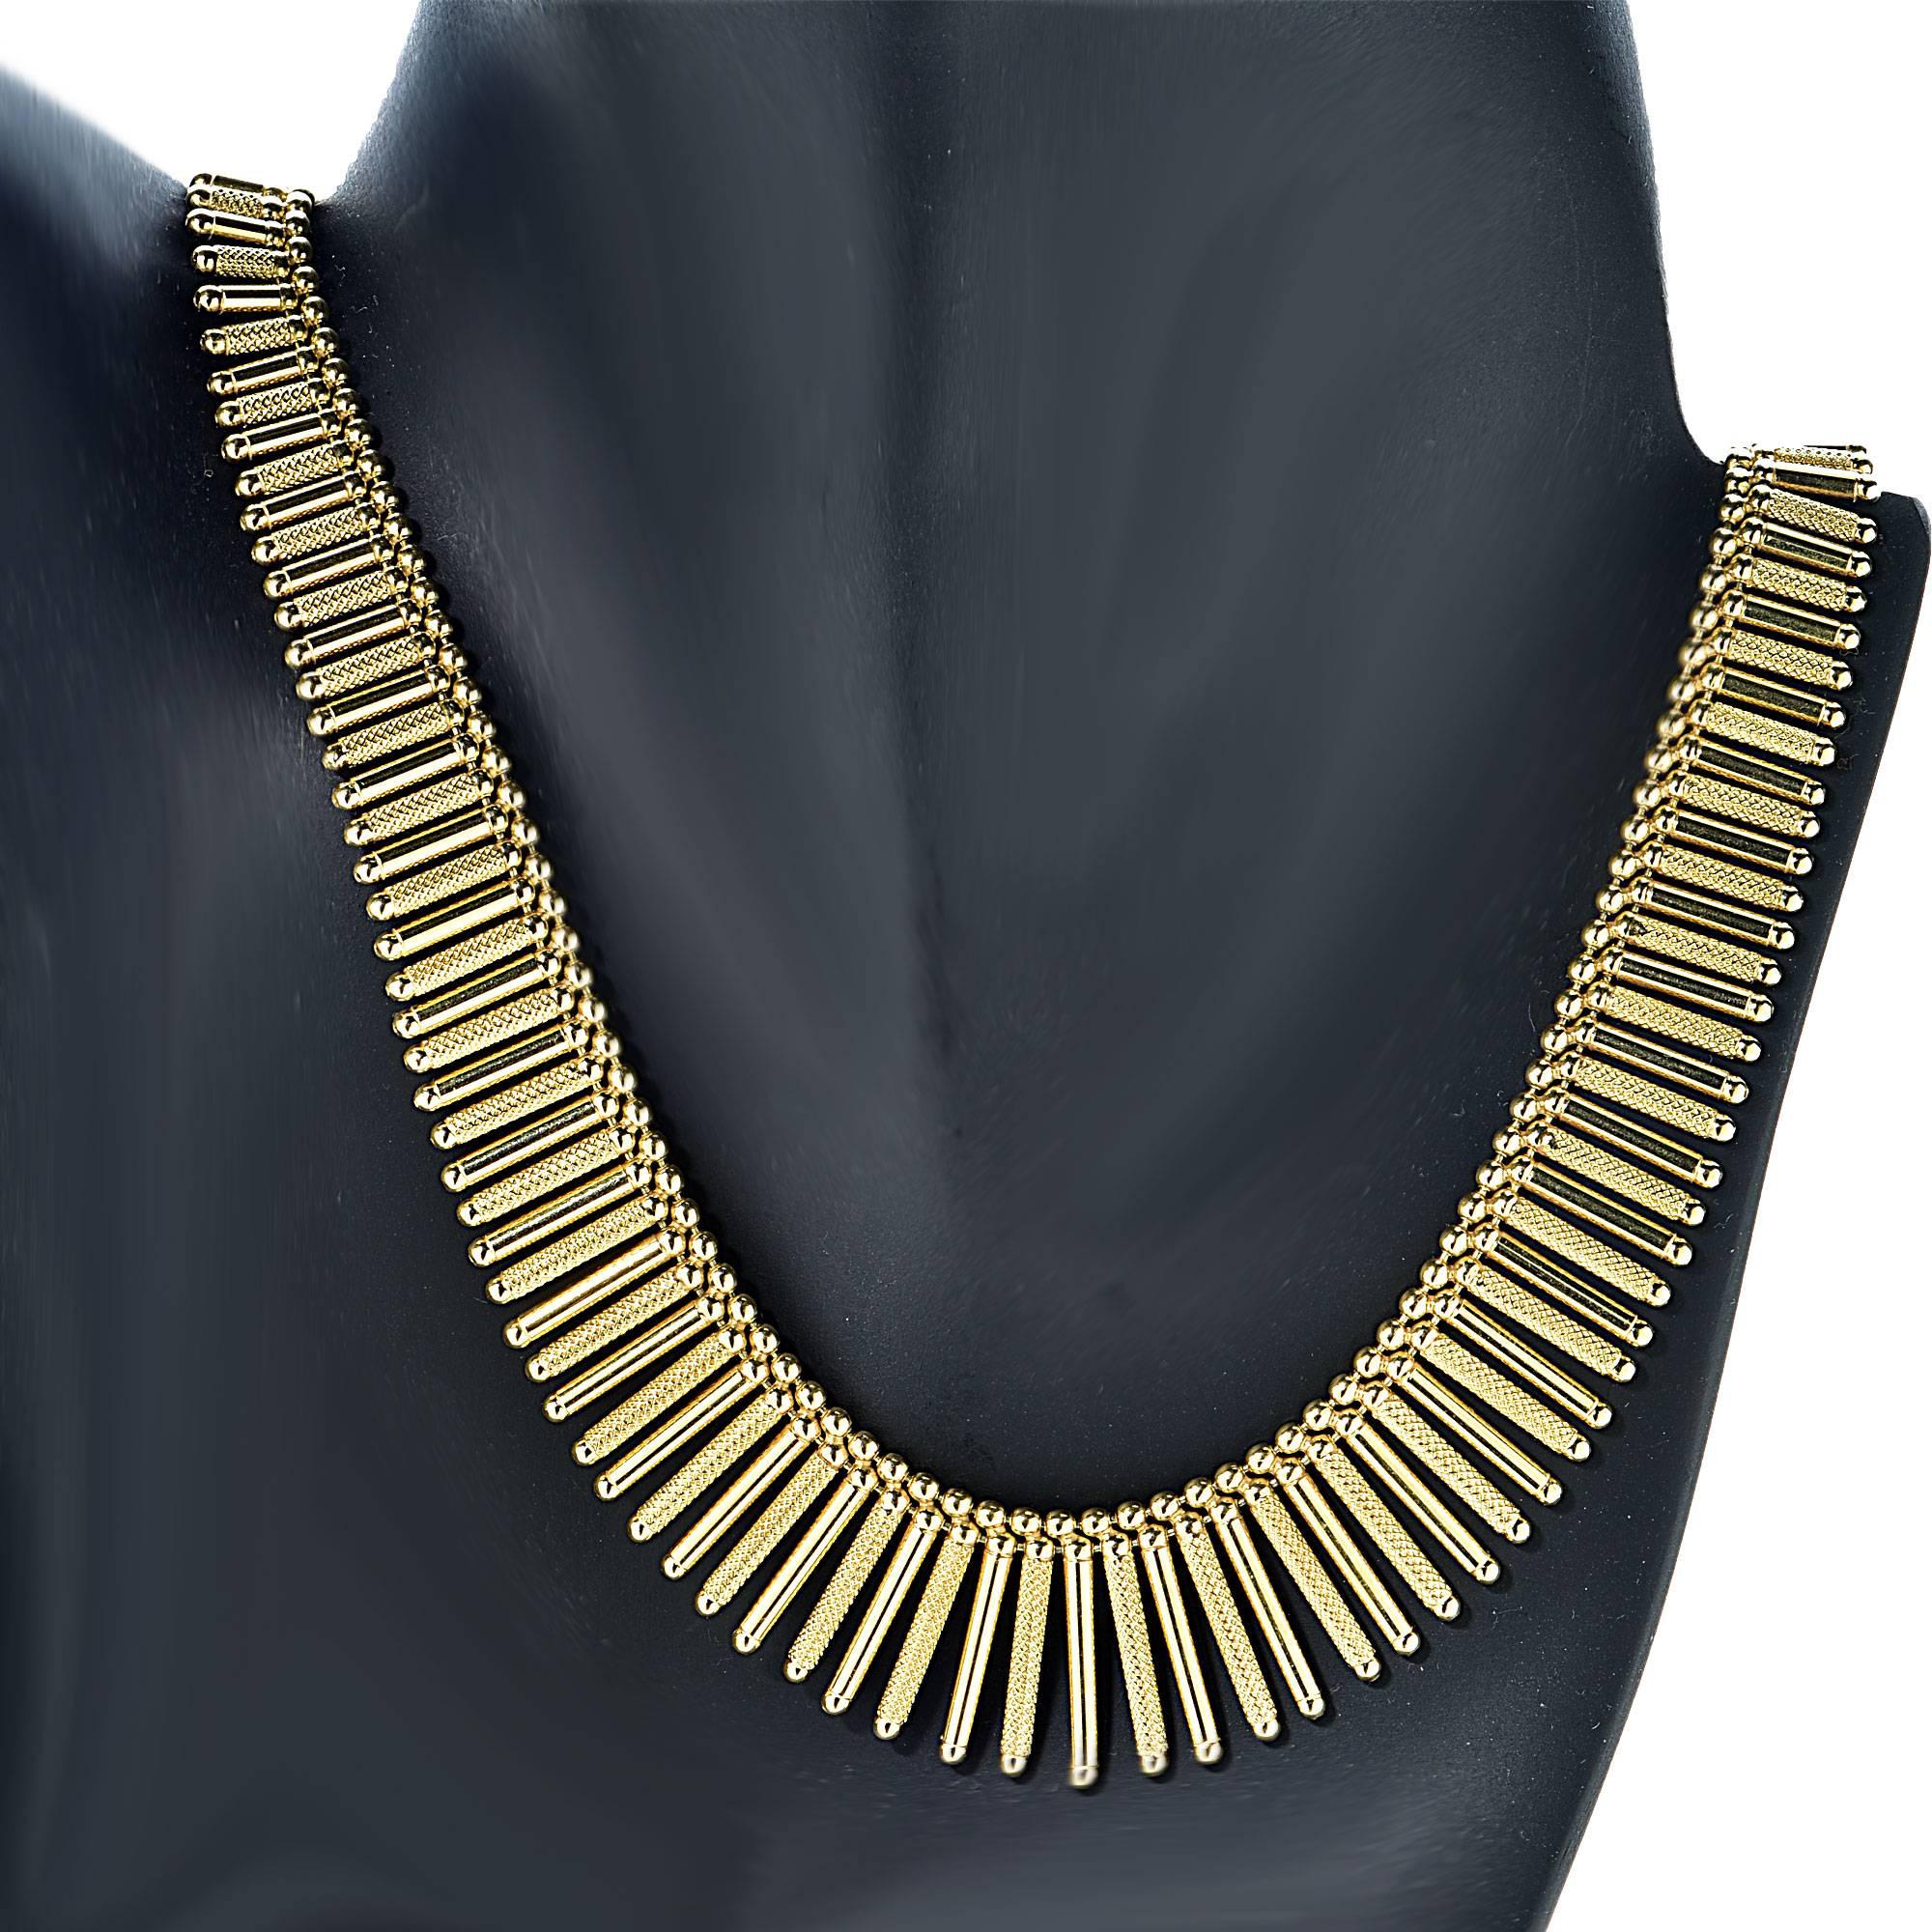 This stunning Italian 18k yellow gold bib necklace features textured and smooth gold bars intermittently arranged accented by gold spheres.

Measurements available upon request.
It is stamped and/or tested as 18k gold.
The metal weight is 52.50